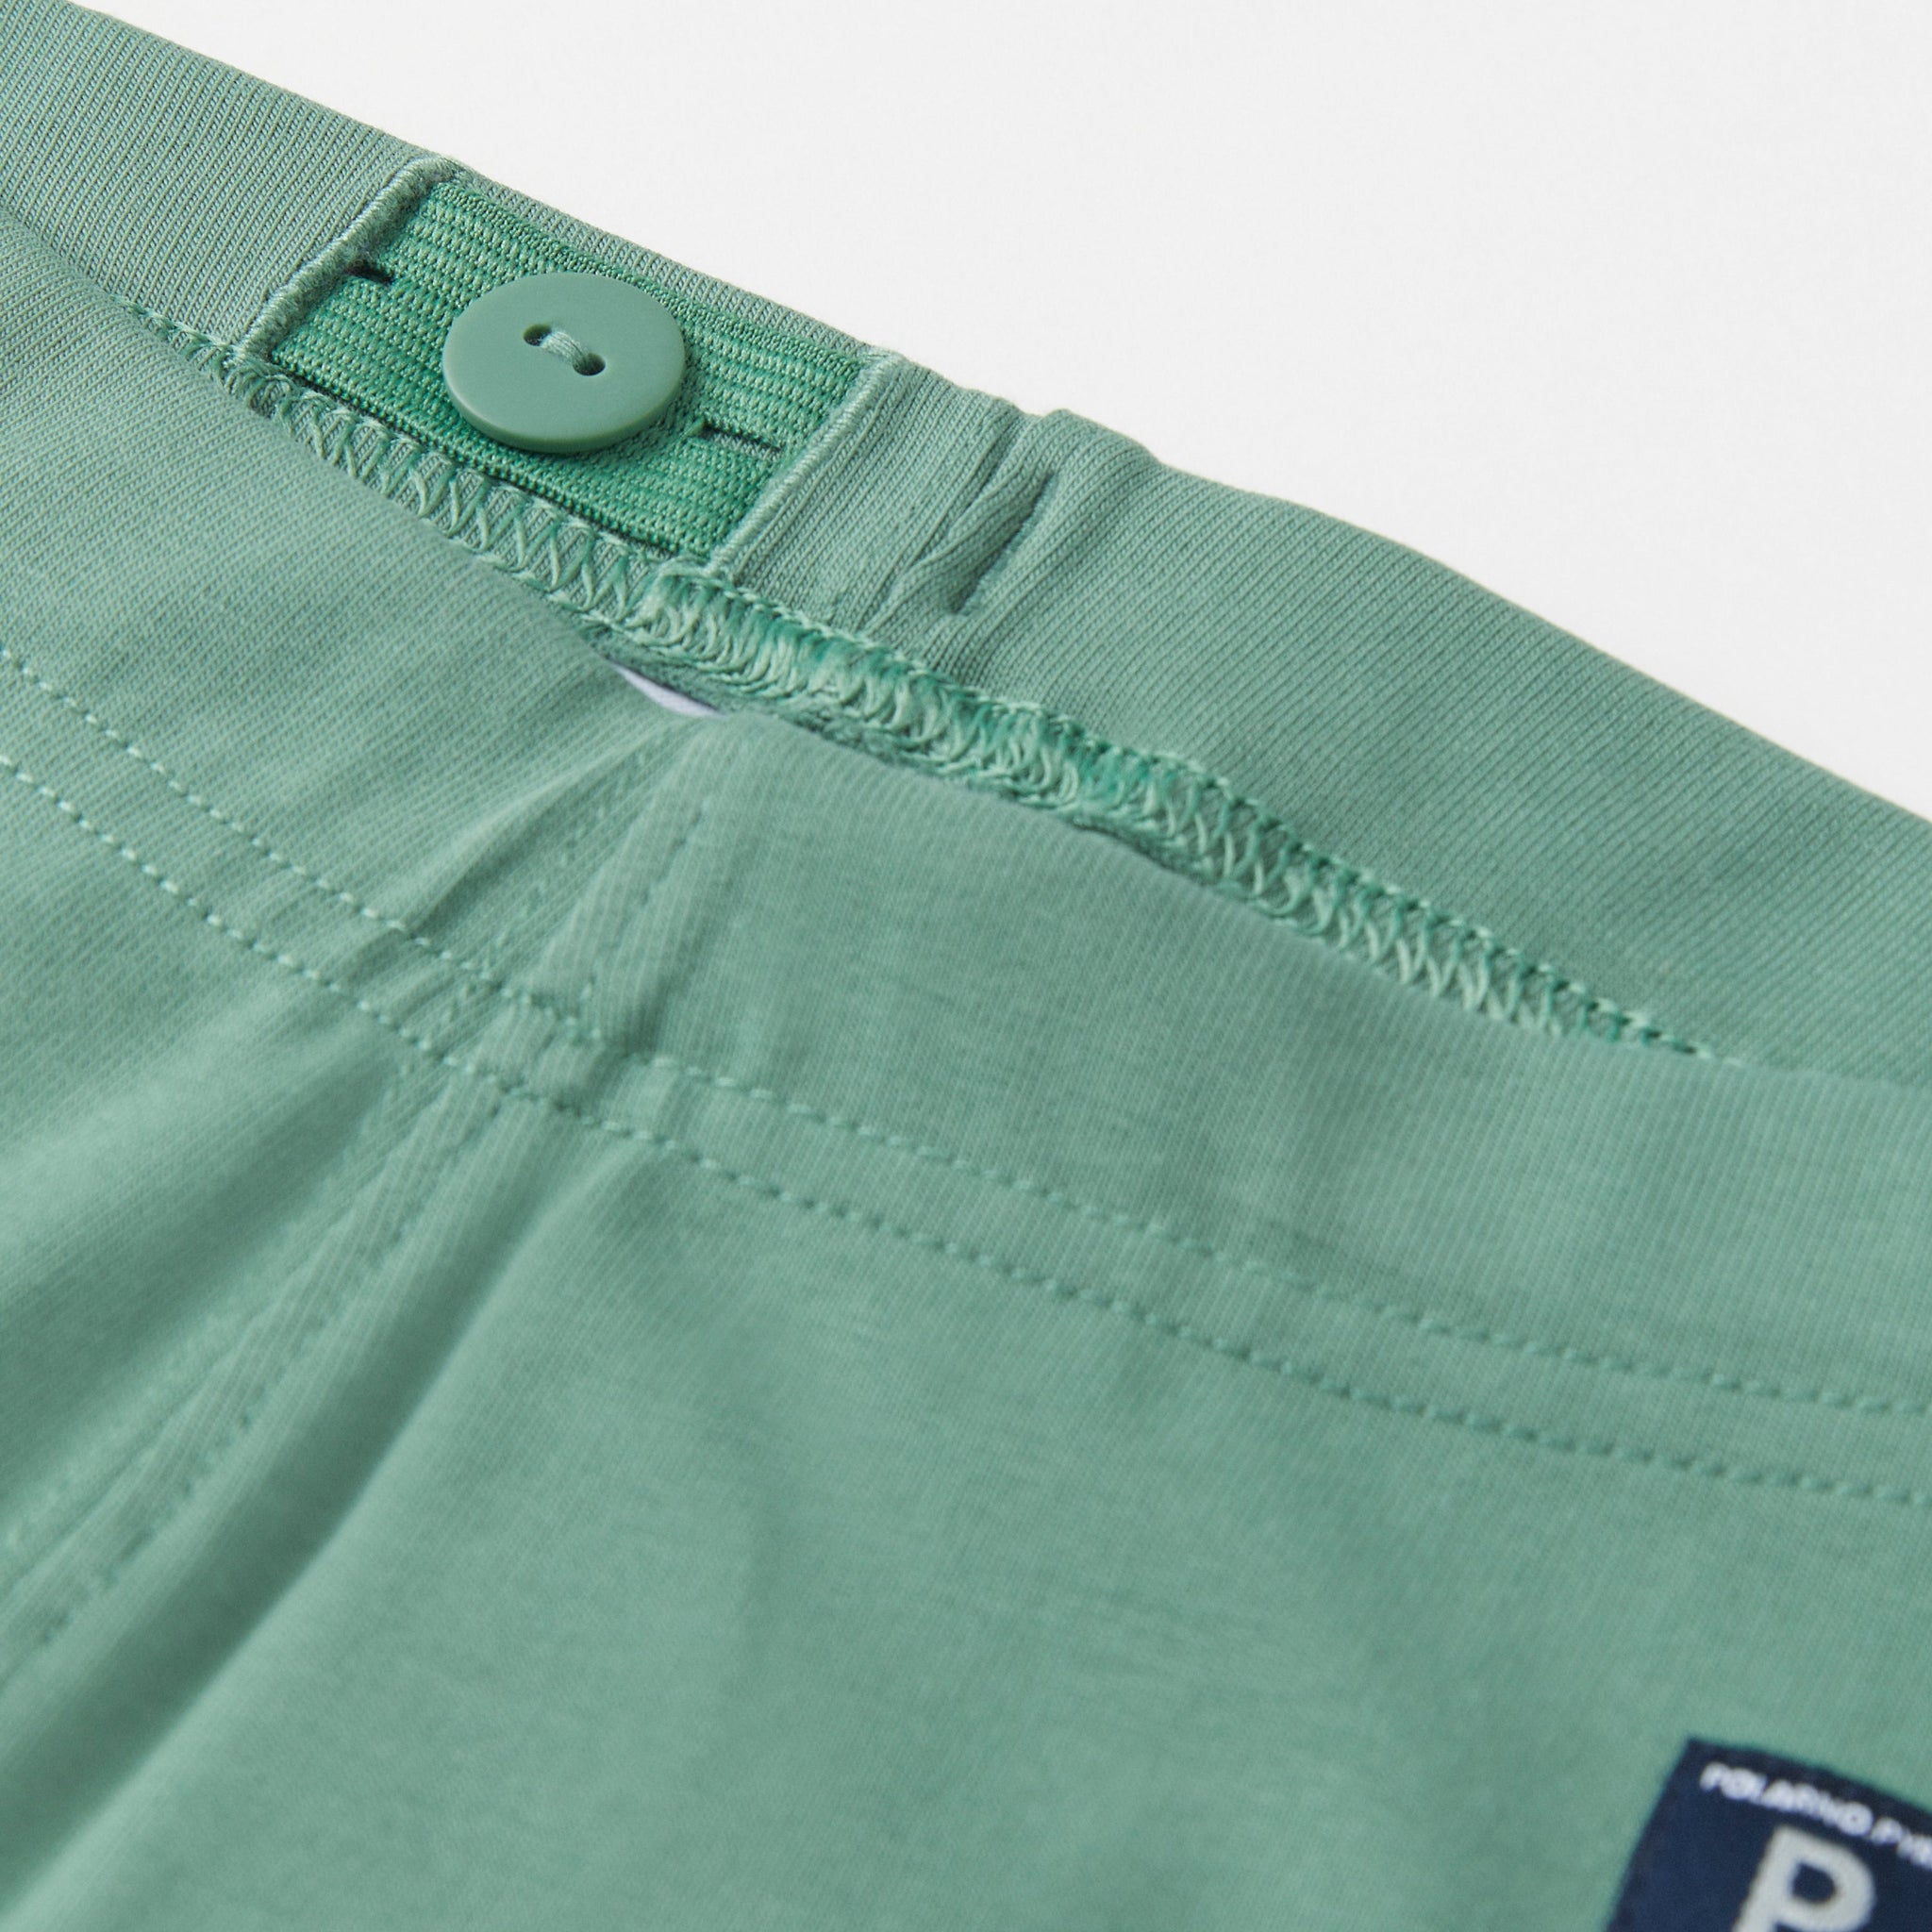 Organic Cotton Green Kids Leggings from the Polarn O. Pyret Kidswear collection. Ethically produced kids clothing.